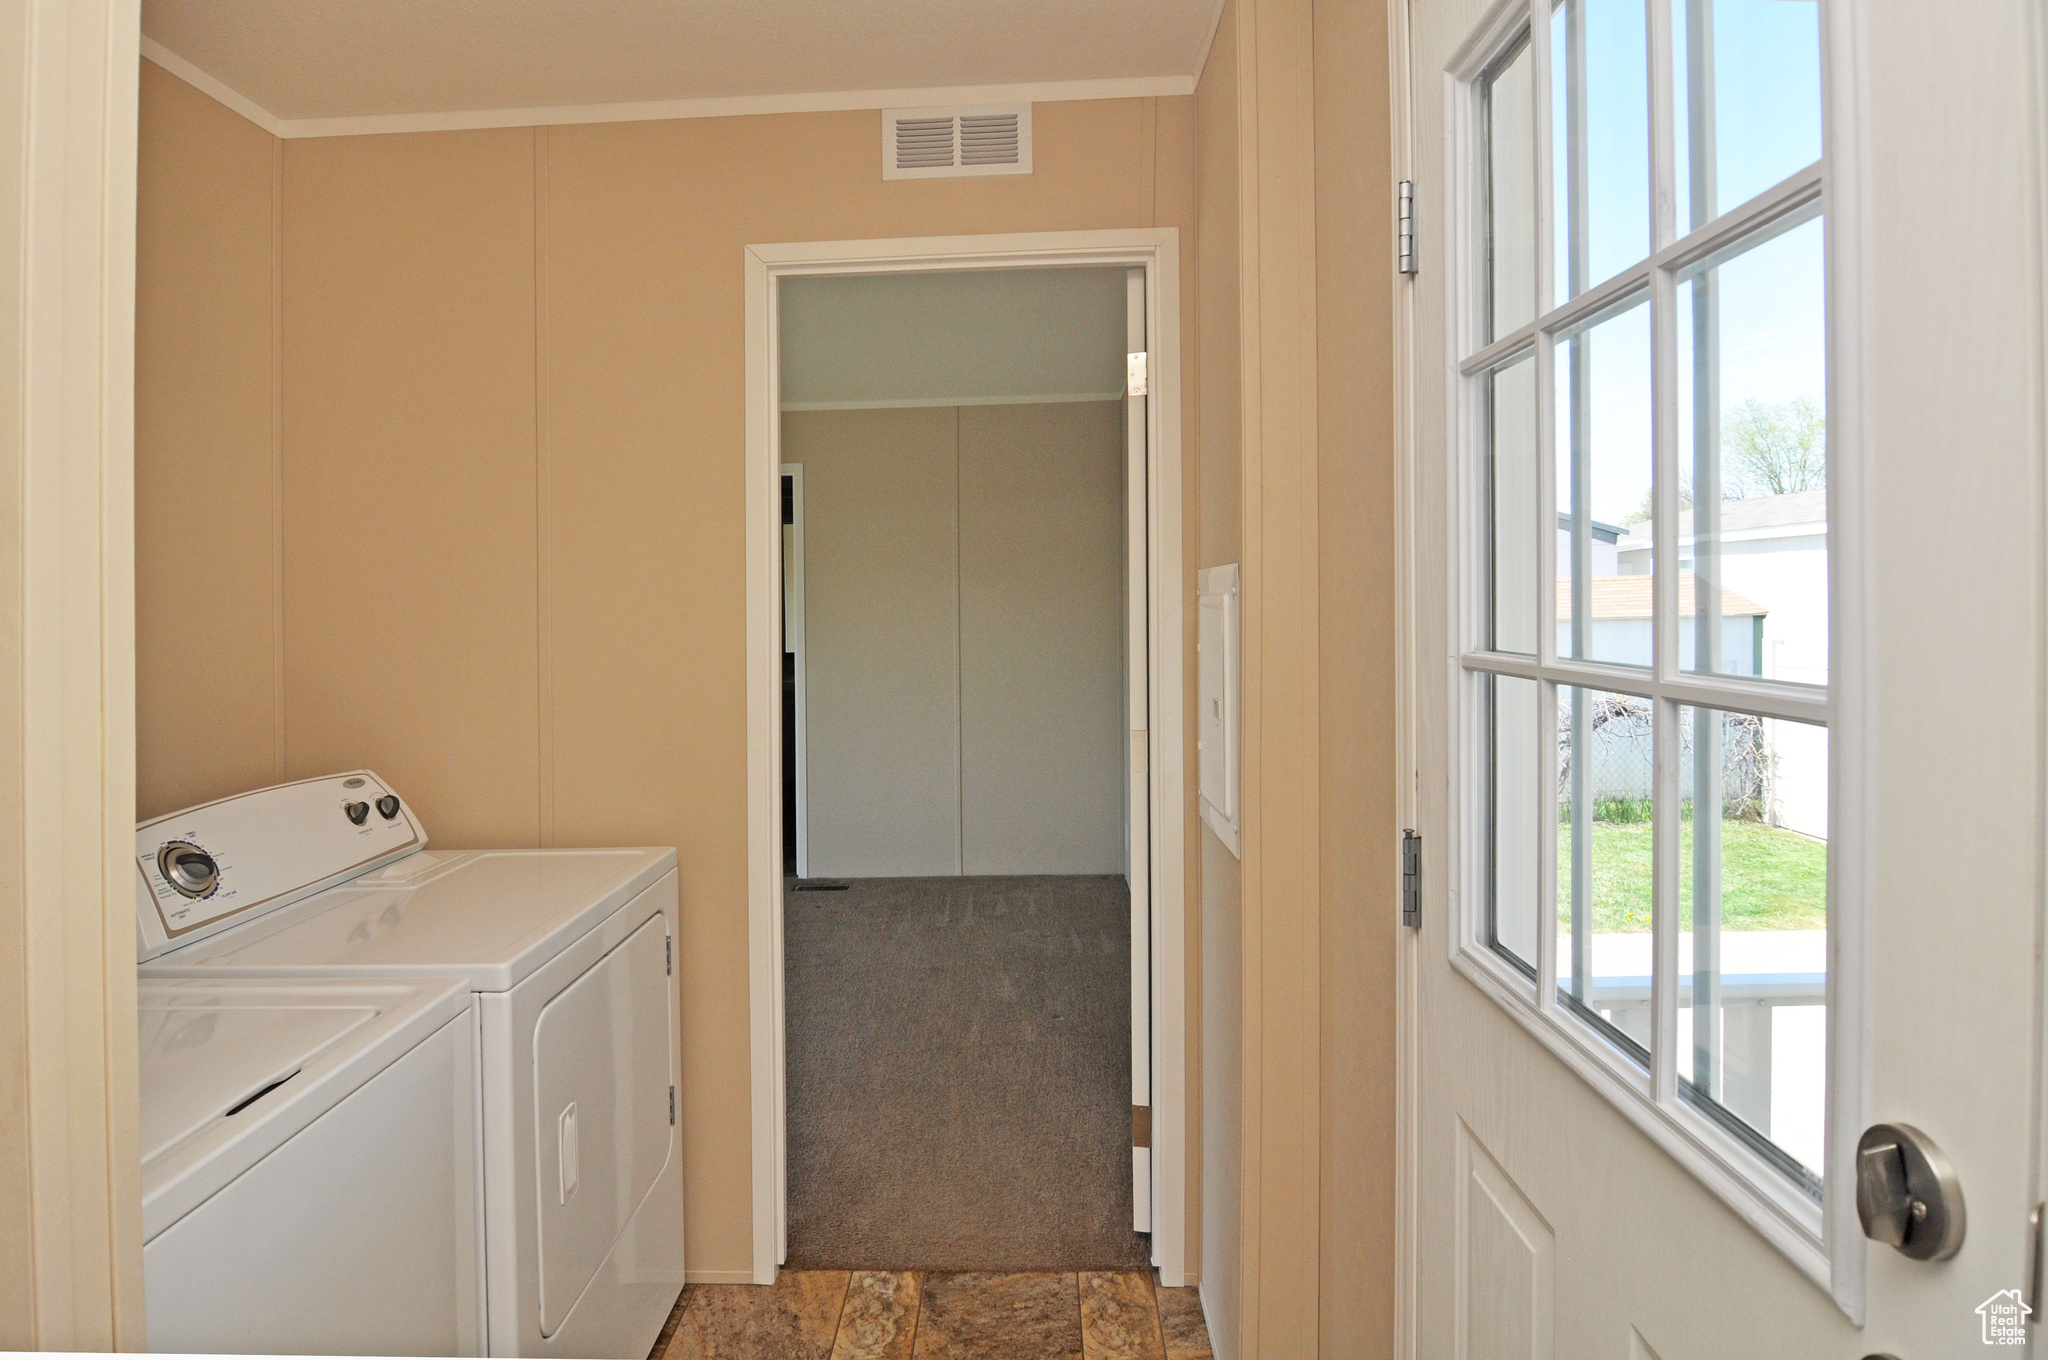 Clothes washing area featuring crown molding, light colored carpet, and washing machine and dryer